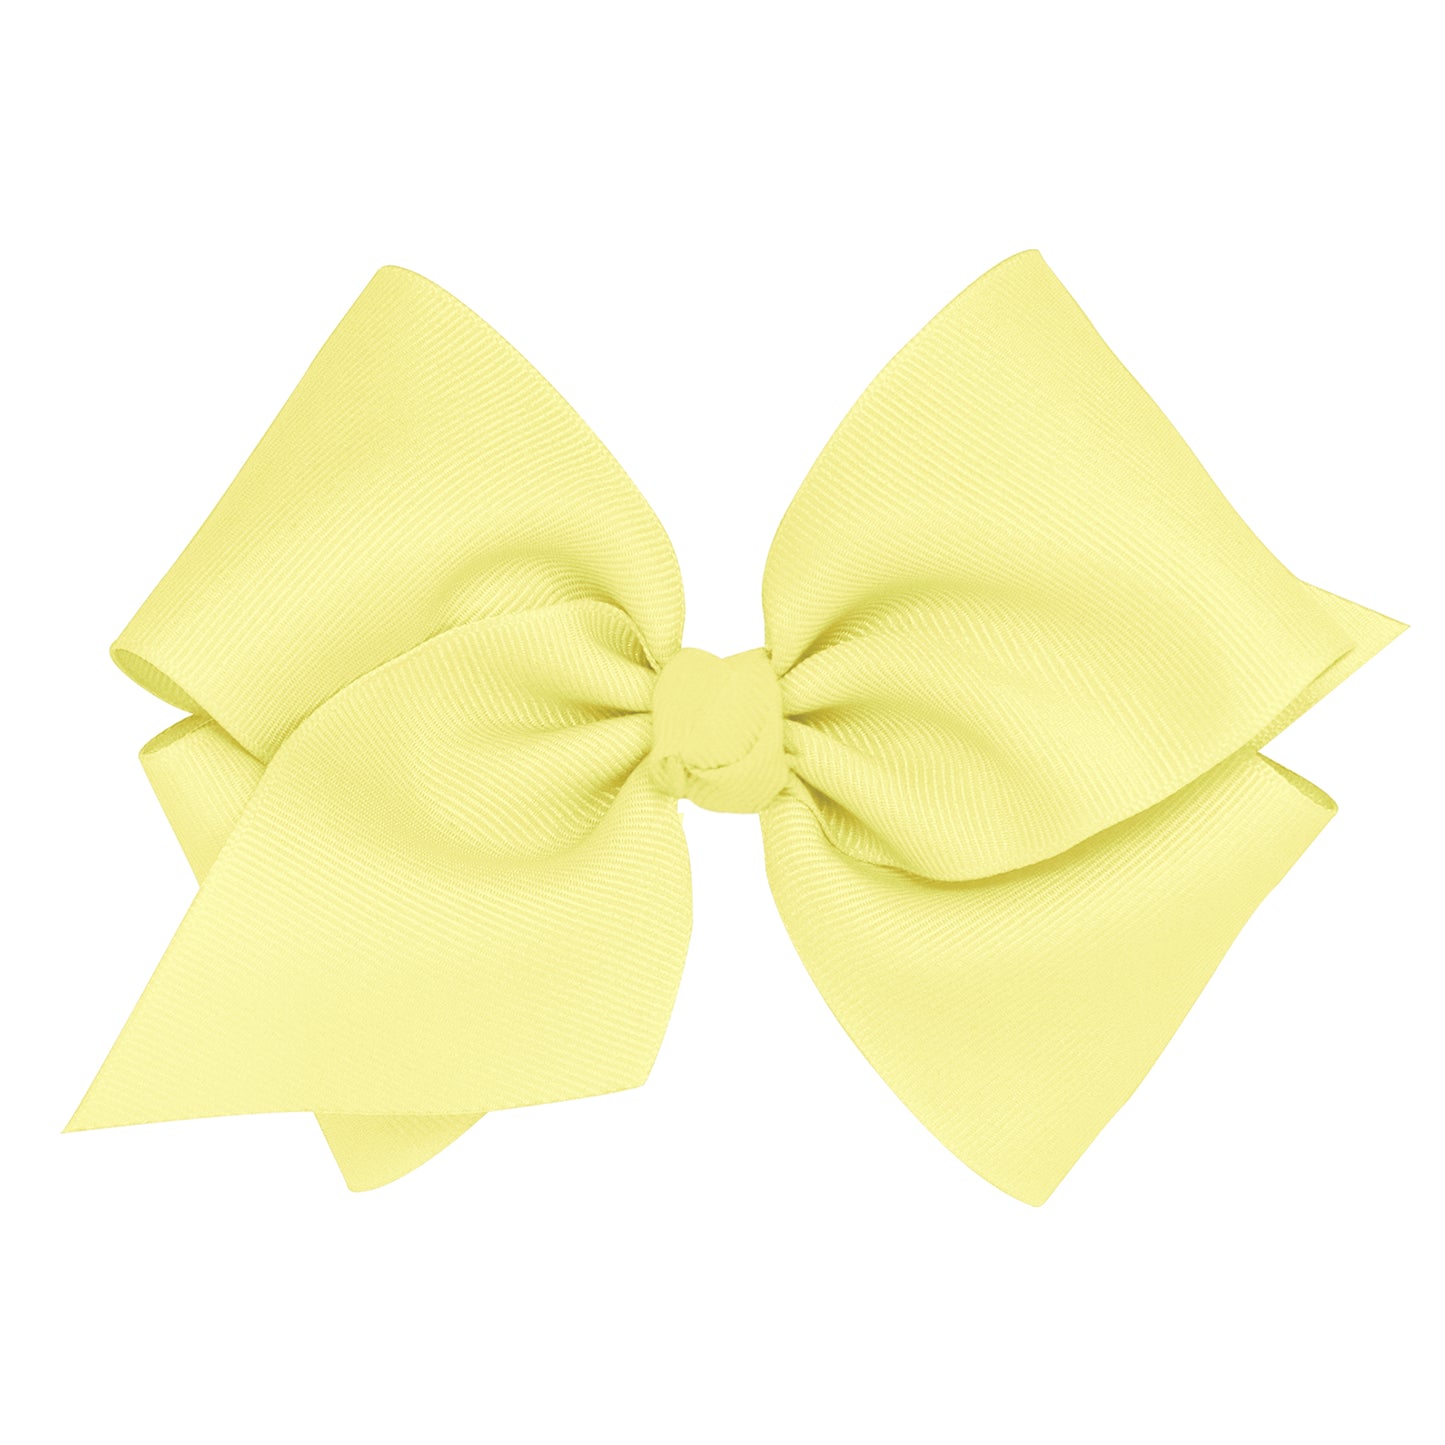 King Grosgrain Hair Bow with Center Knot - Light Yellow